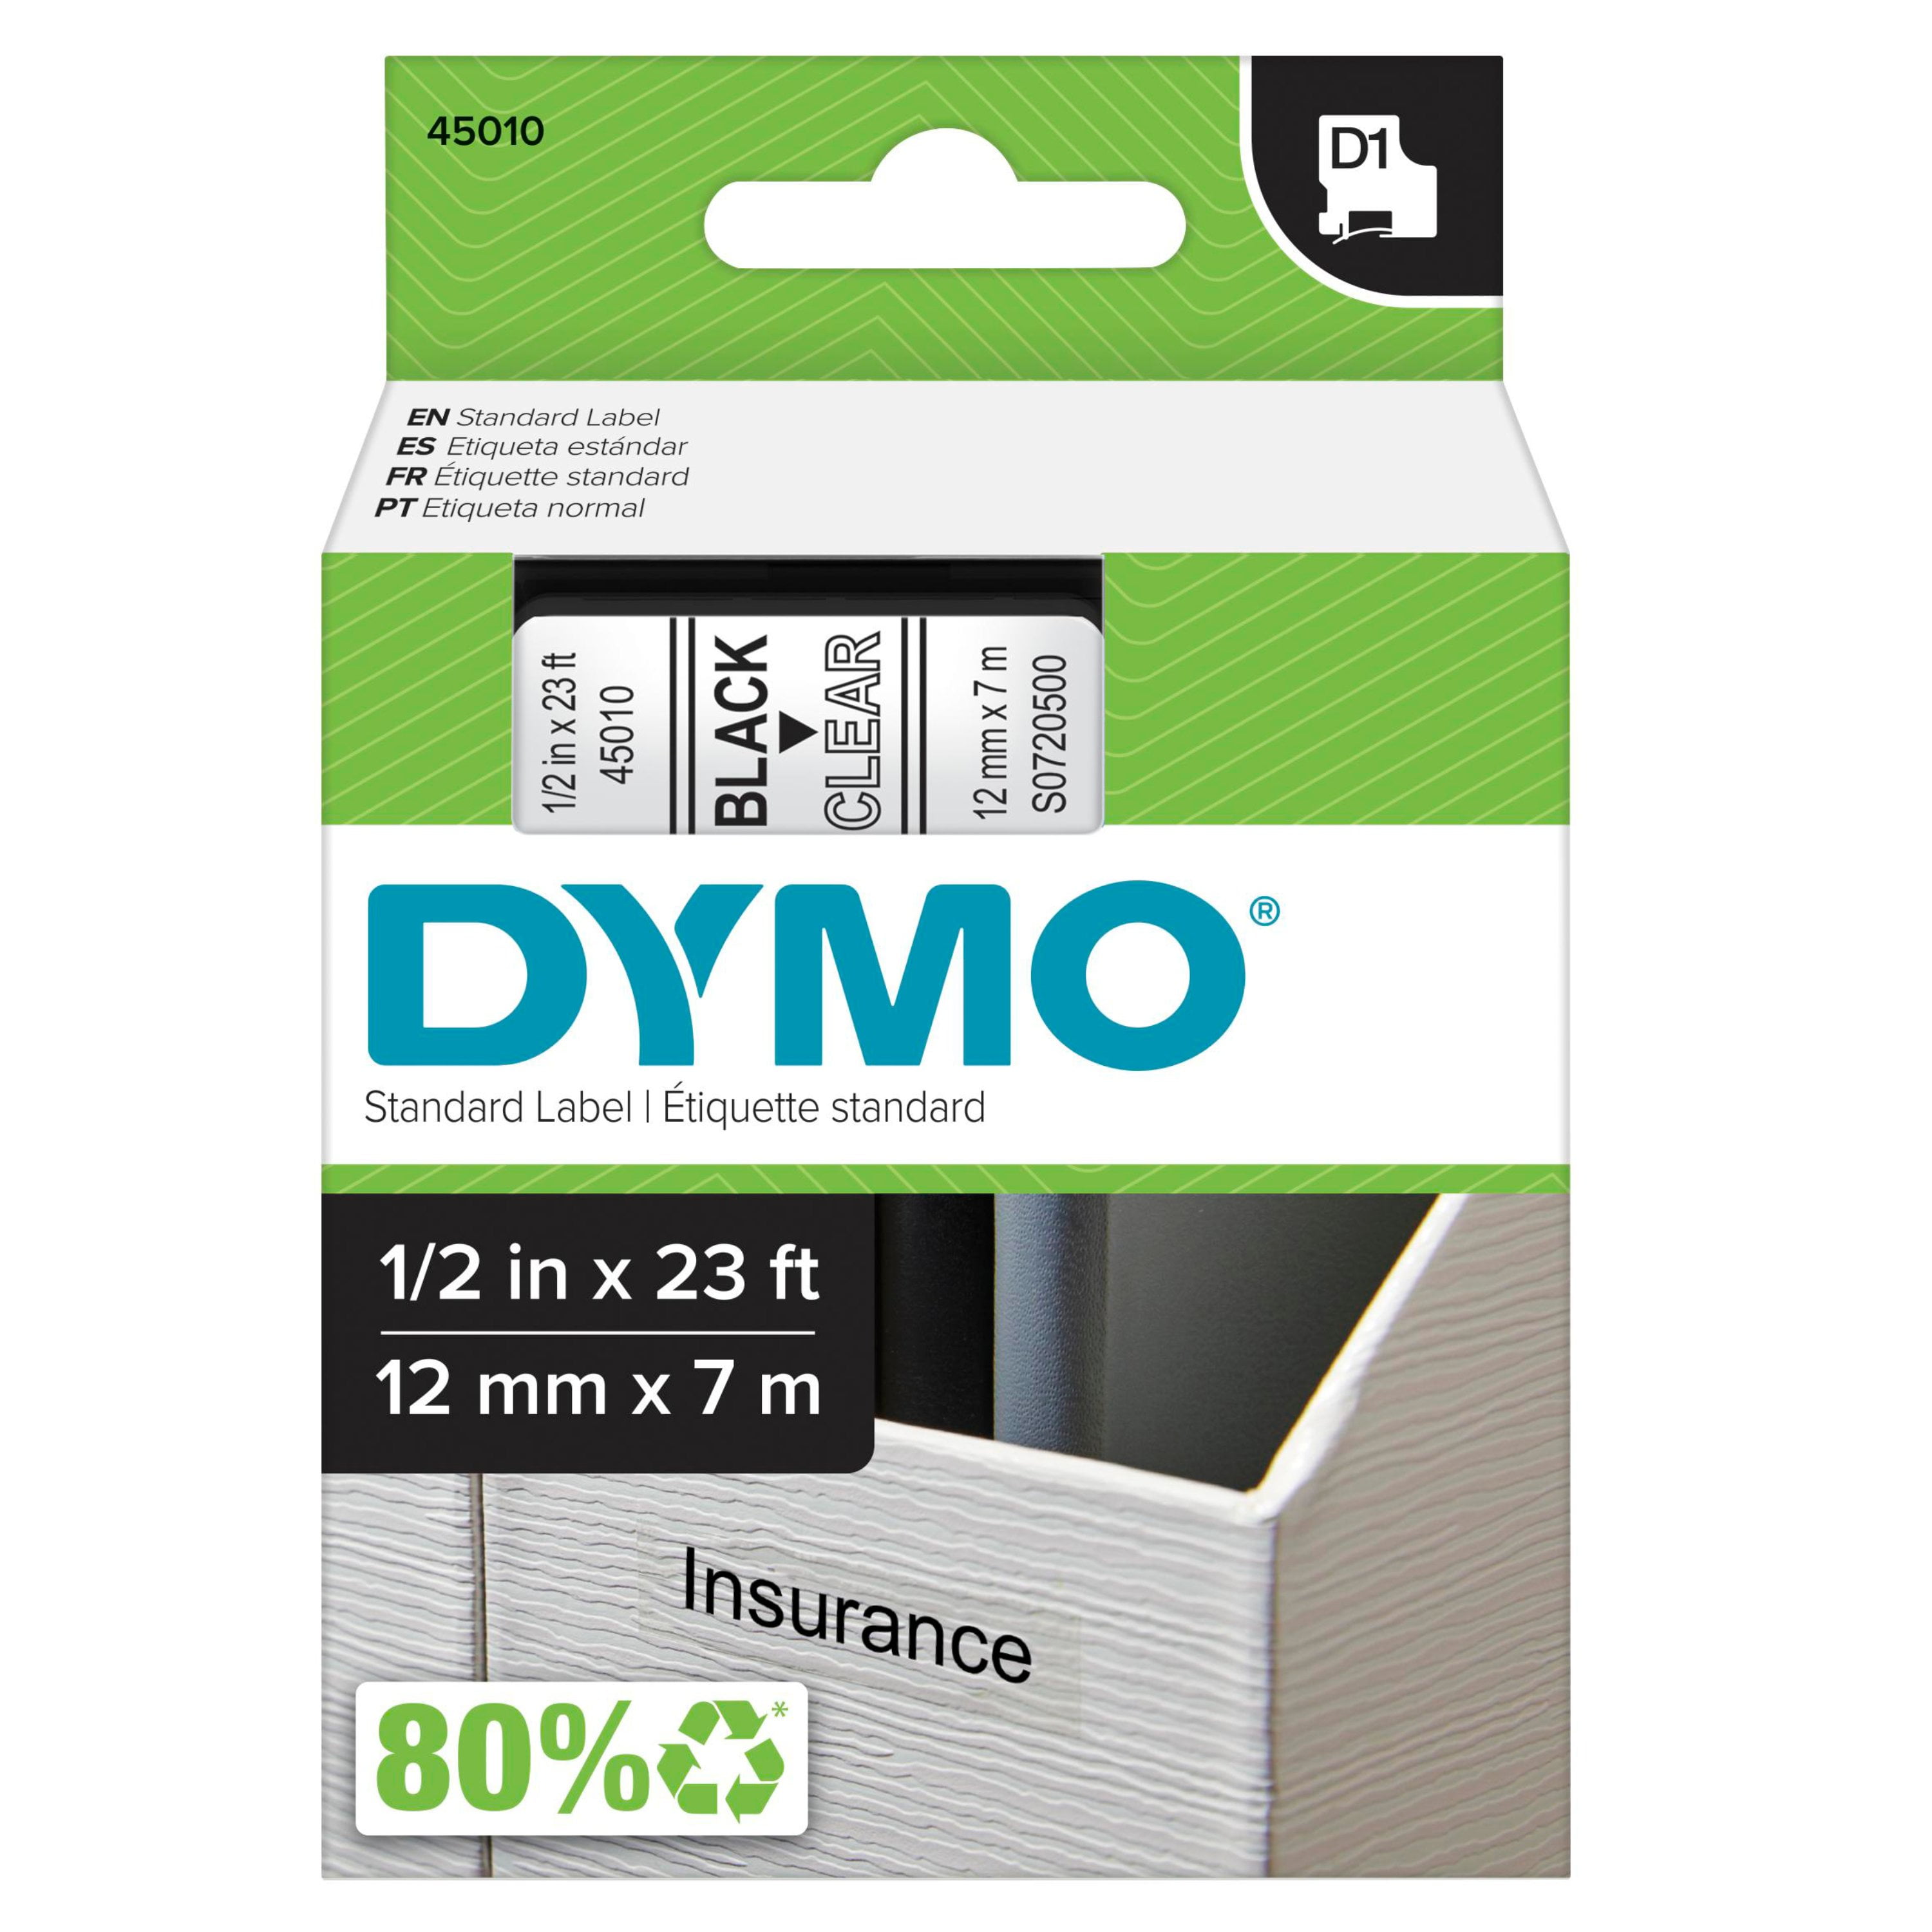 Dymo d1 Standard Labels Black Print on Clear Tape 1/2 x 23', Compatible  with Label Manager and Label Writer